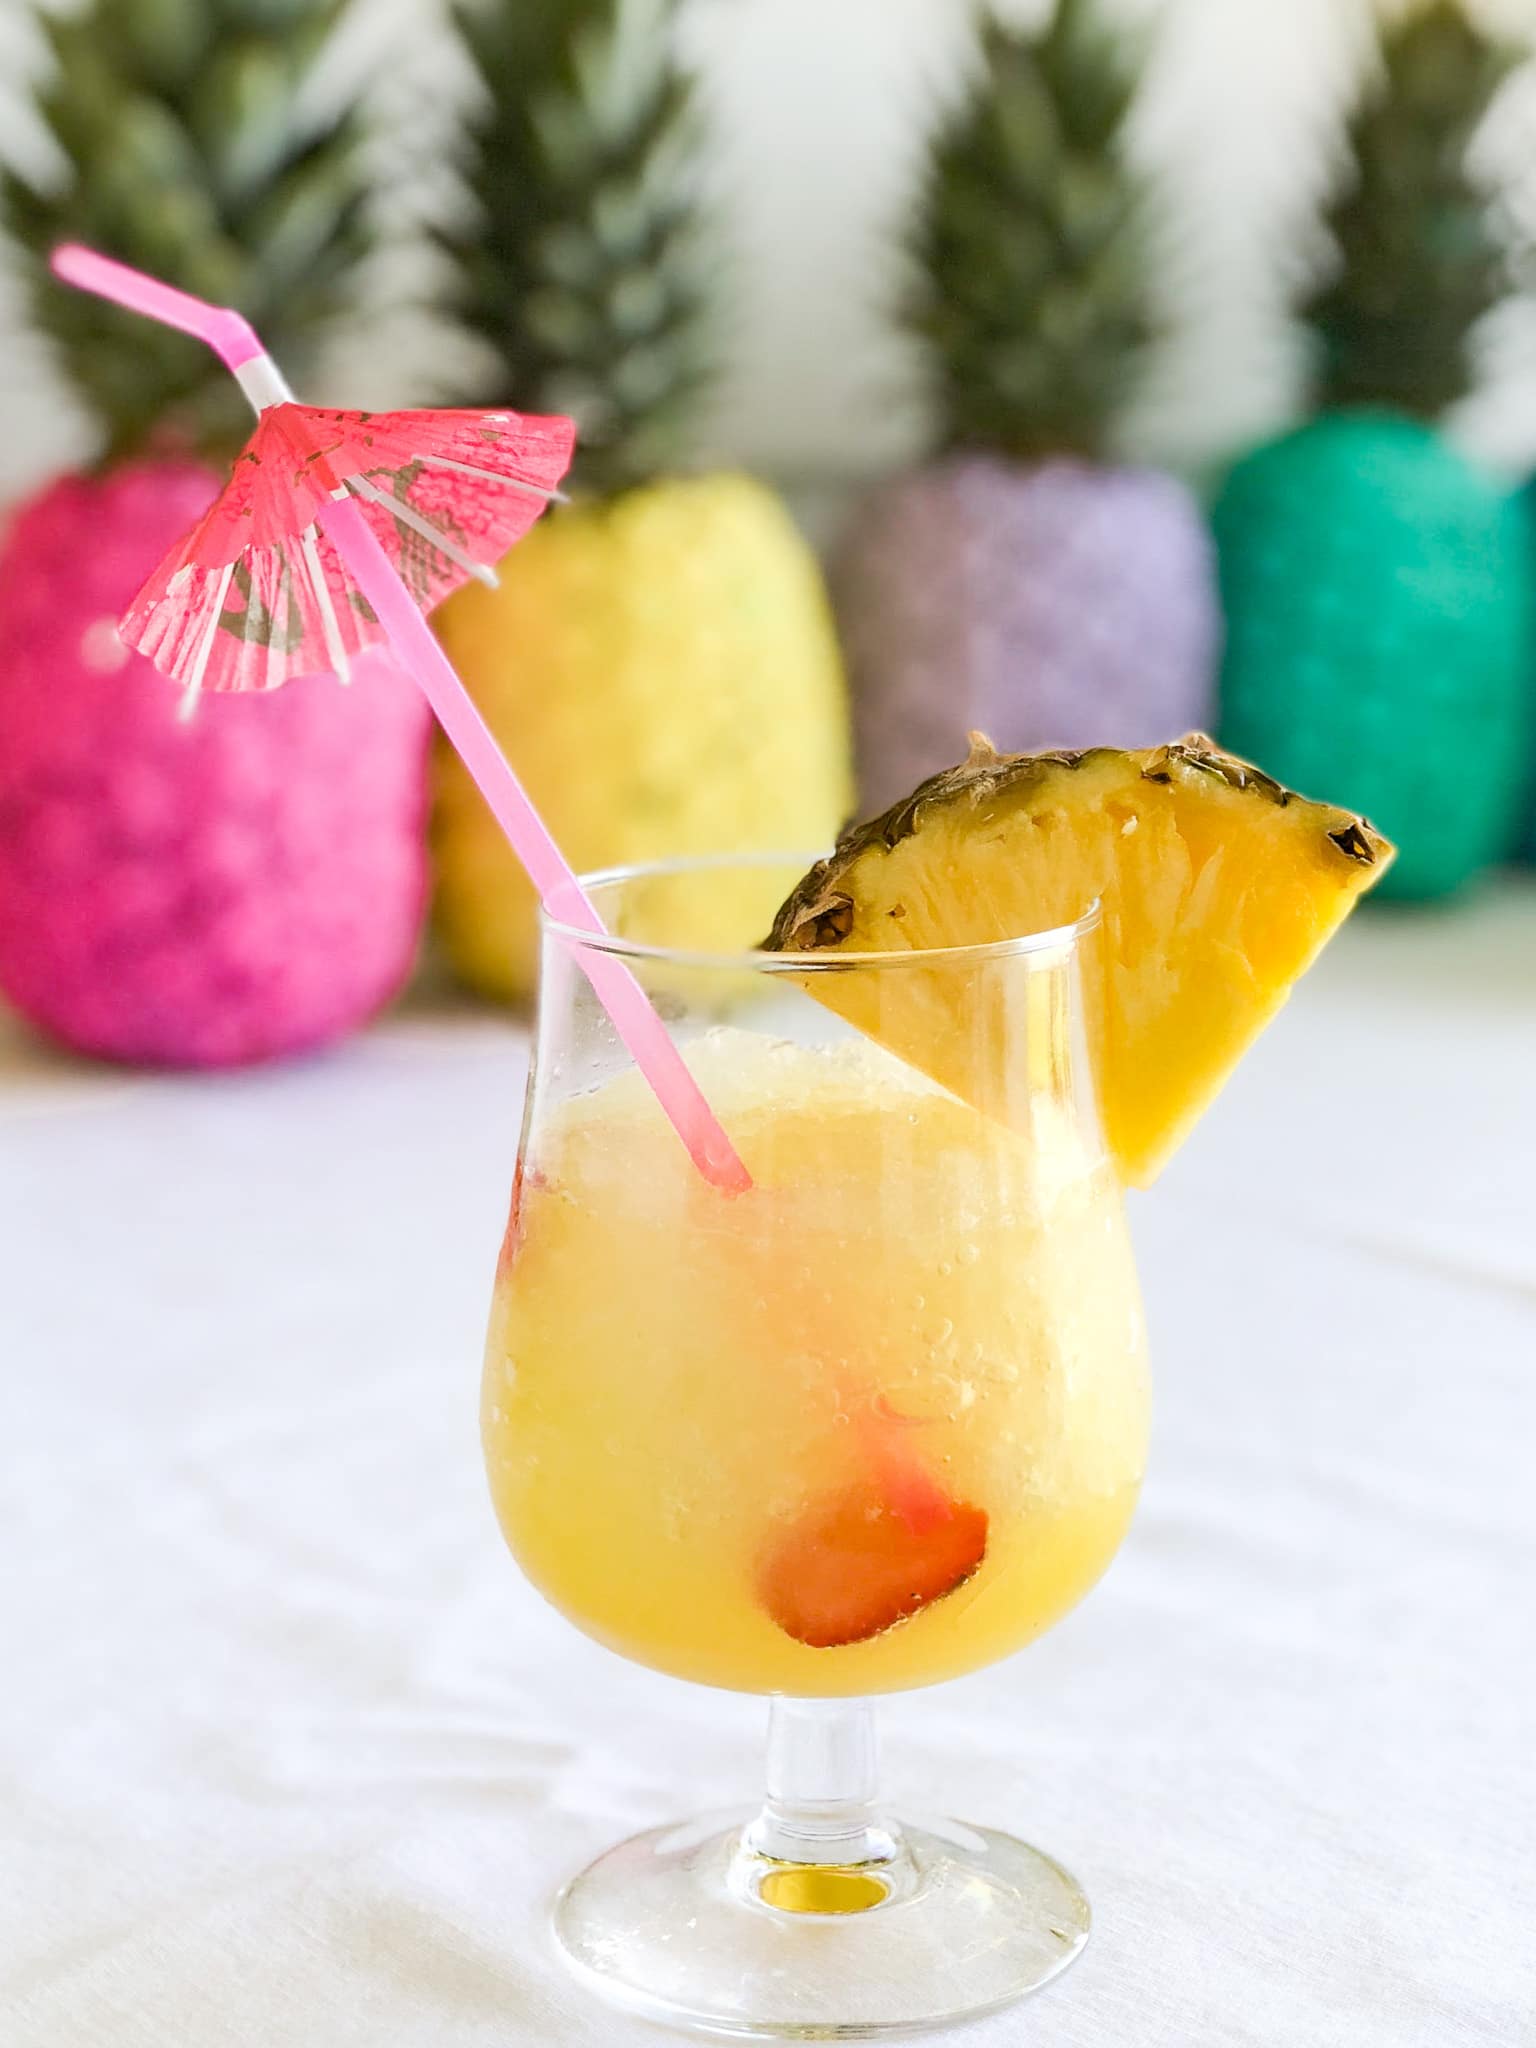 Pineapple Lime Luau Slushy Punch is a party must! Refreshing pineapple and tangy lime combine favors in this fizzy, fruity, slushy punch that makes enough for a crowd!